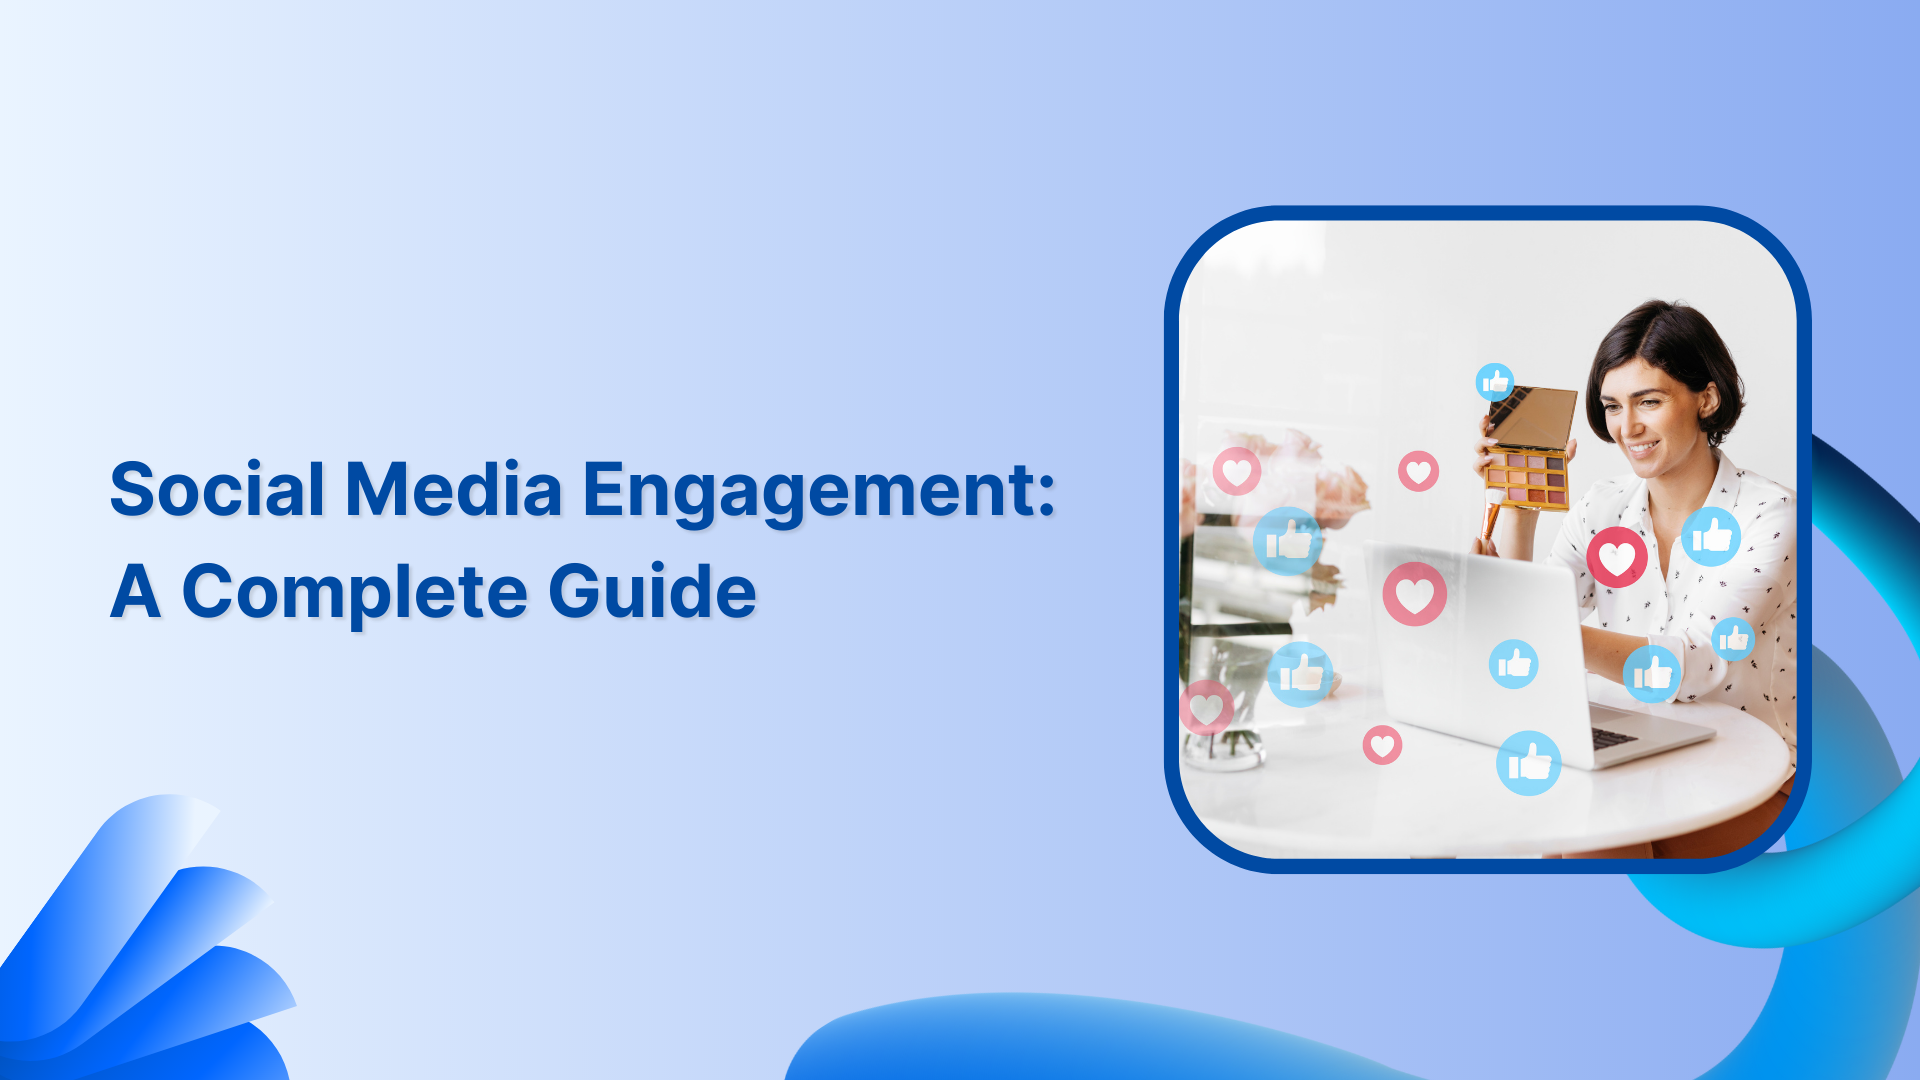 Social Media Engagement: 10 Easy Ways to Improve it